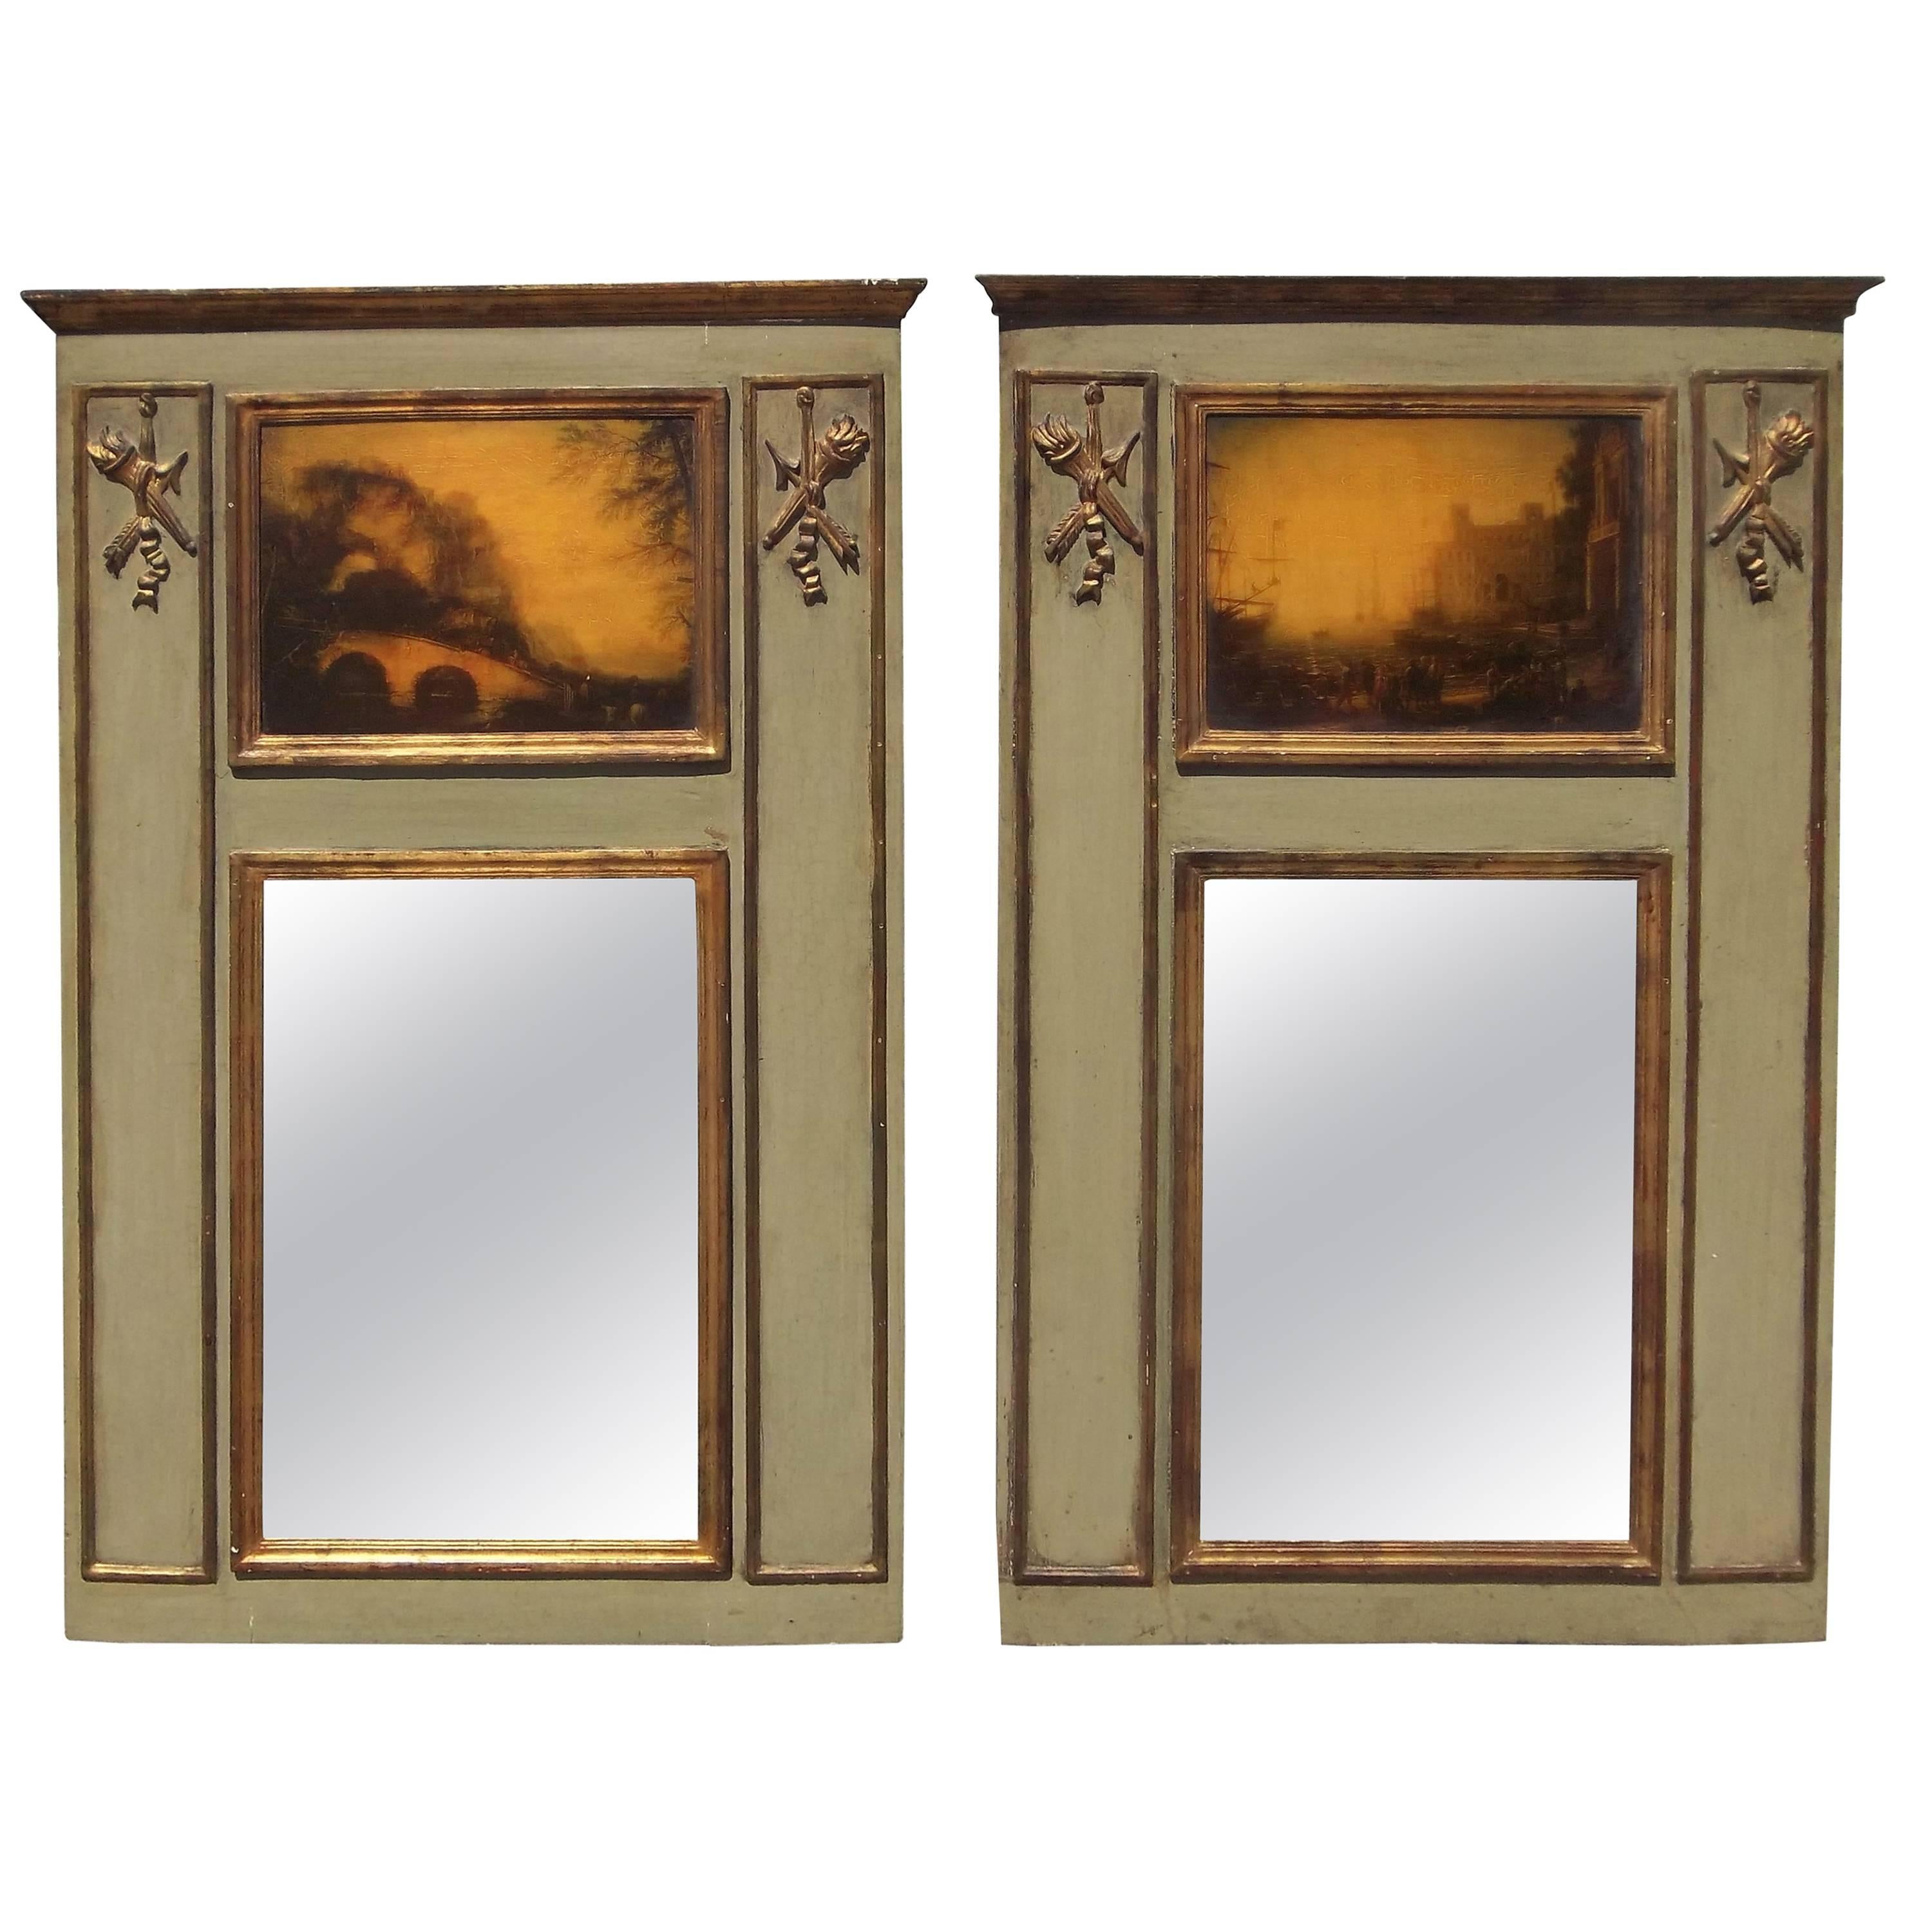 Pair of French or Italian Diminutive Trumeau Mirrors